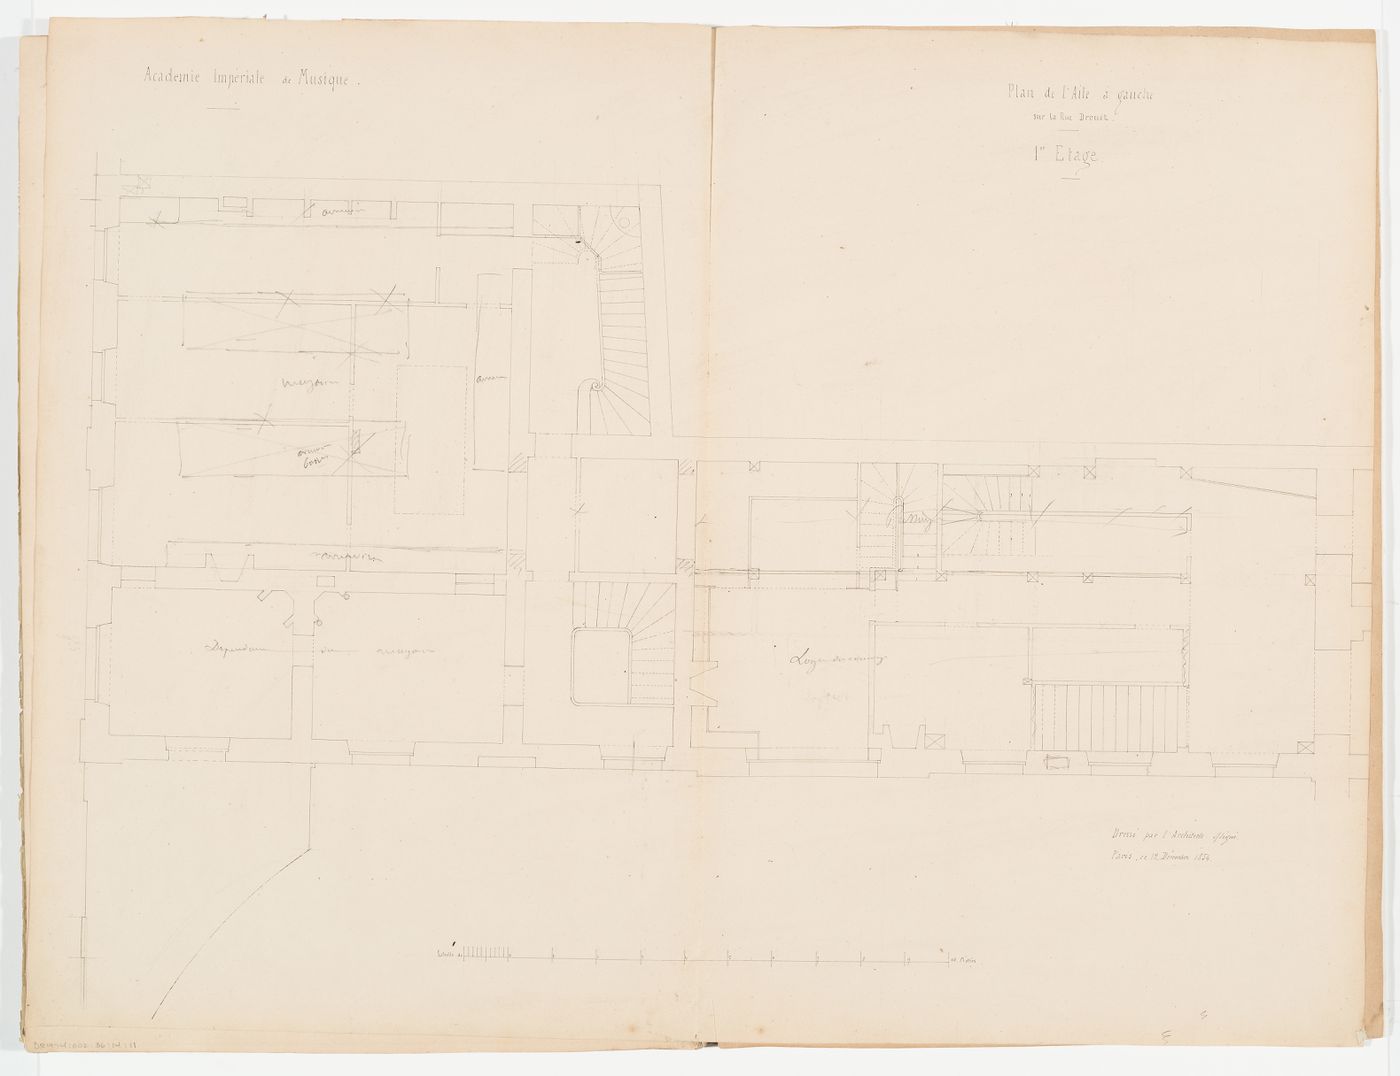 First floor plan of Salle Le Peletier with additions for alterations